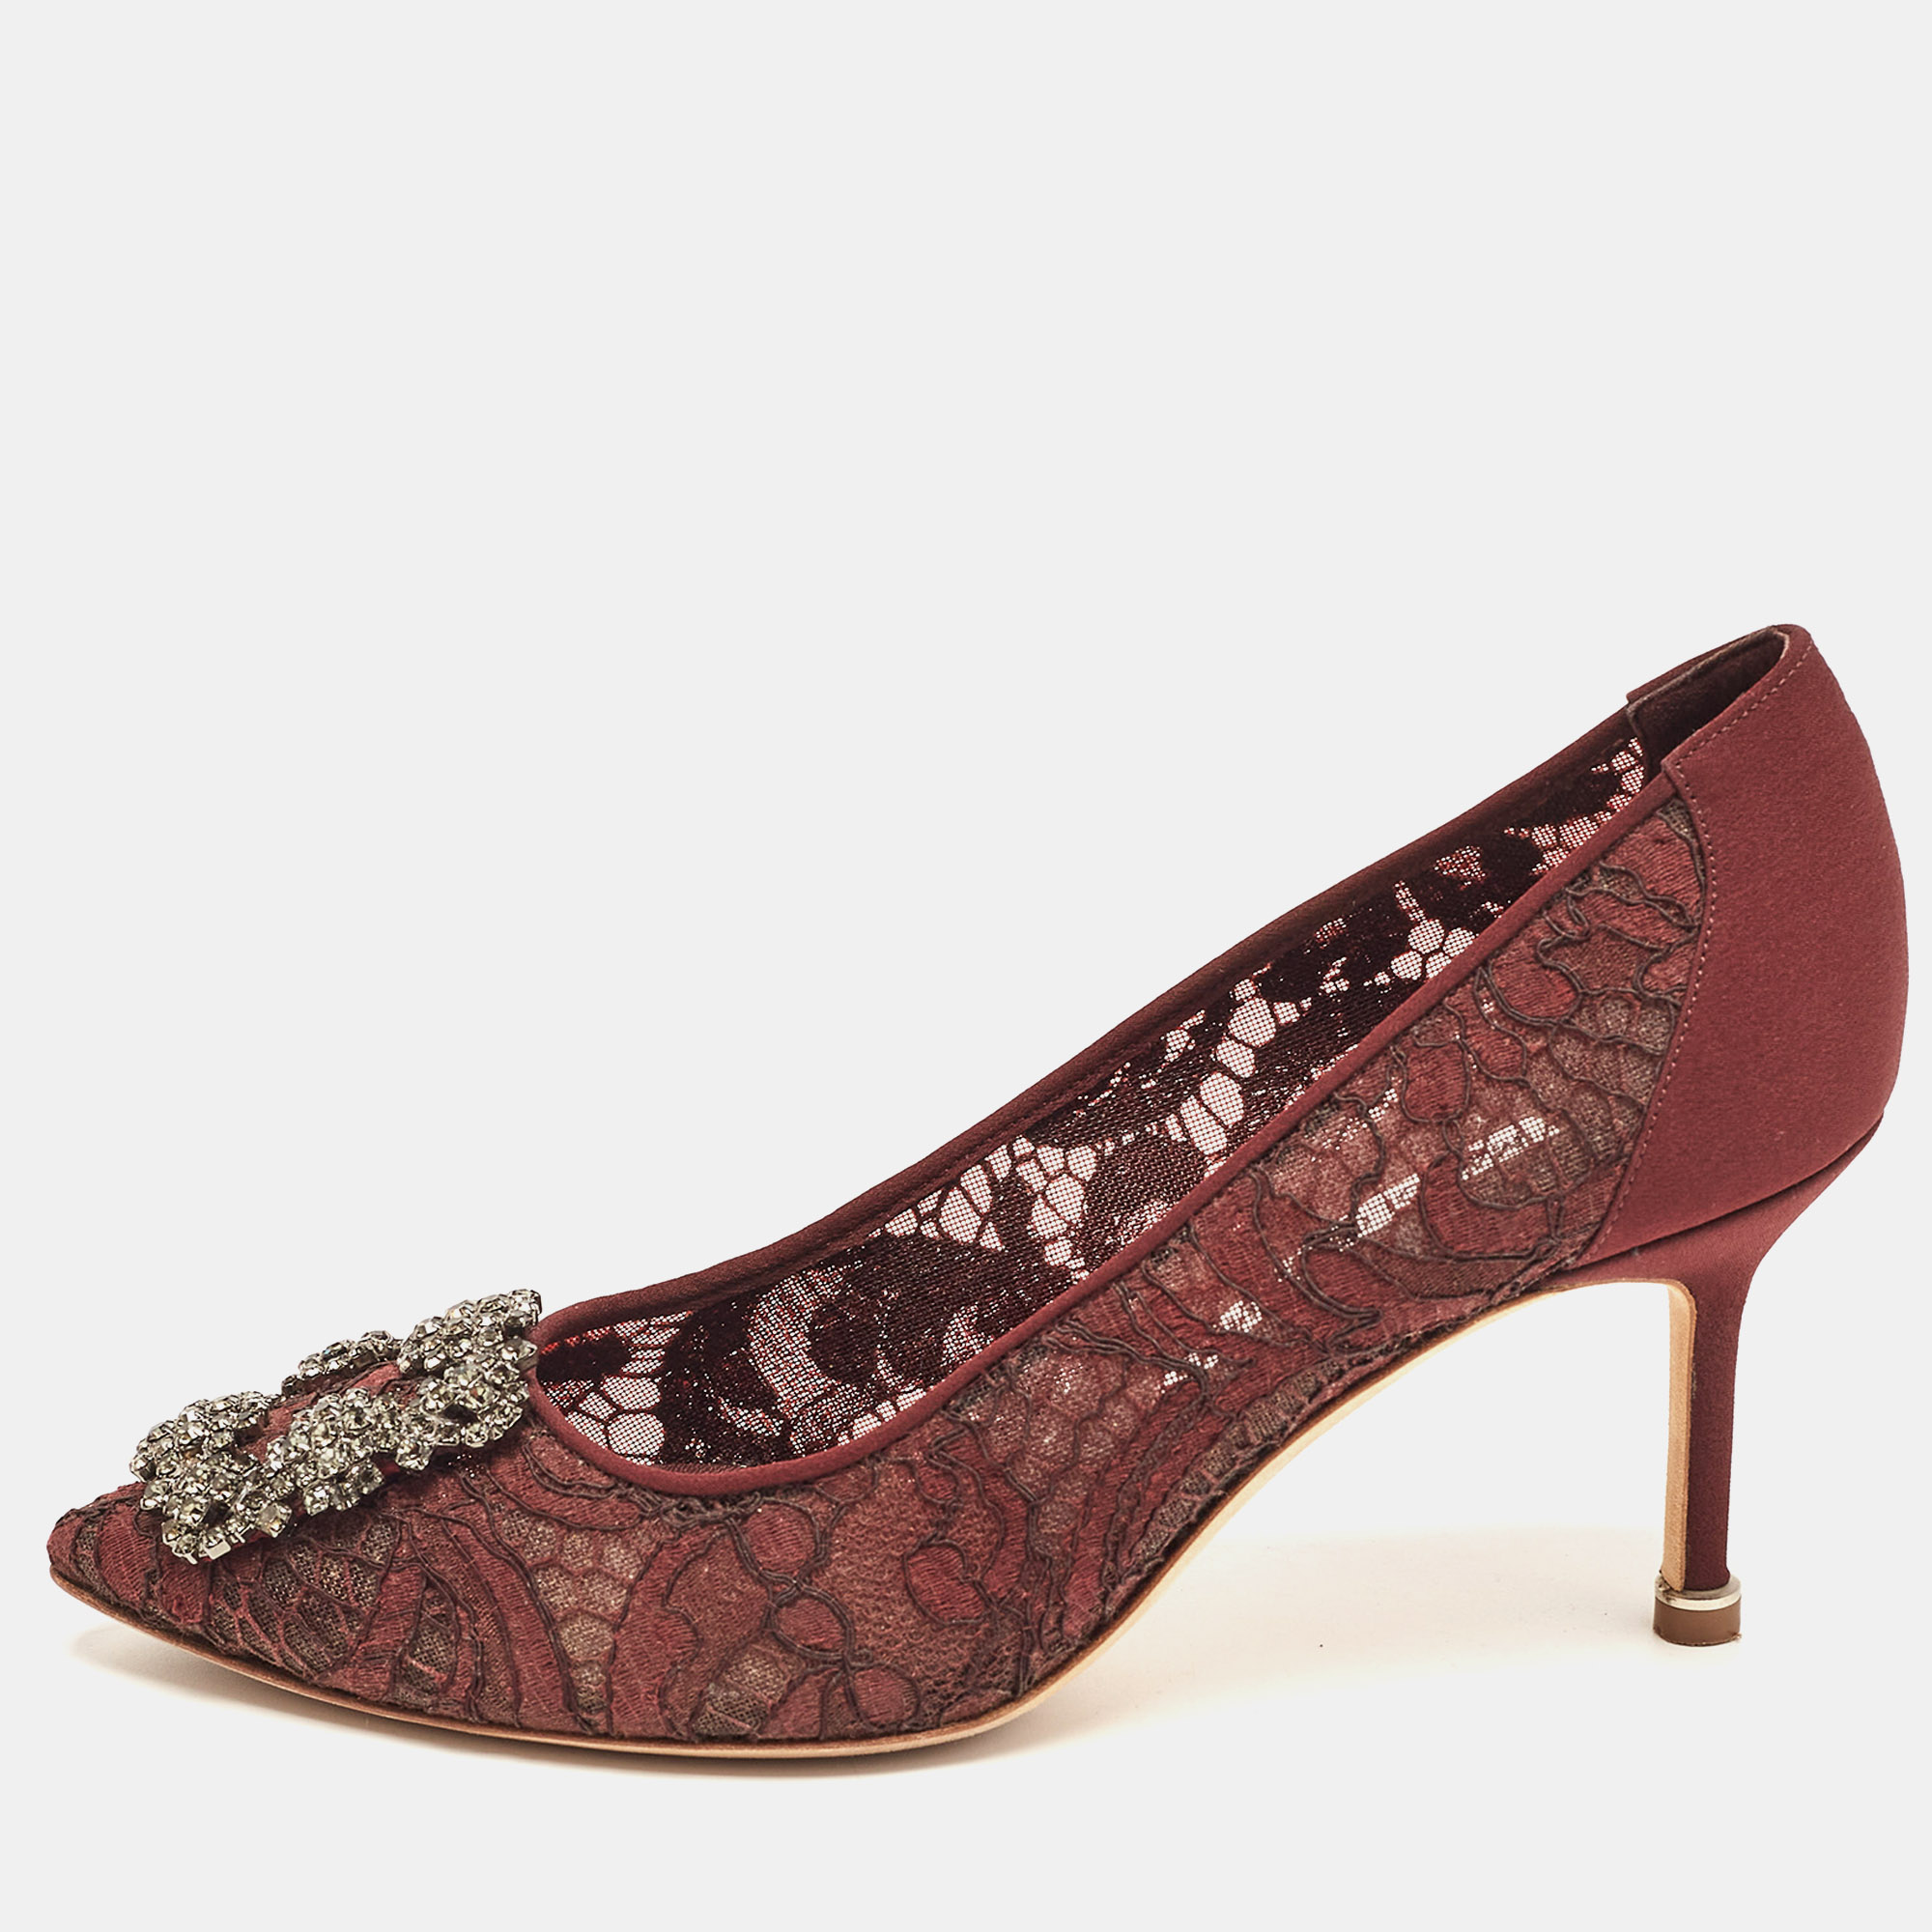 Manolo blahnik burgundy lace and mesh hangisi pointed toe pumps size 36